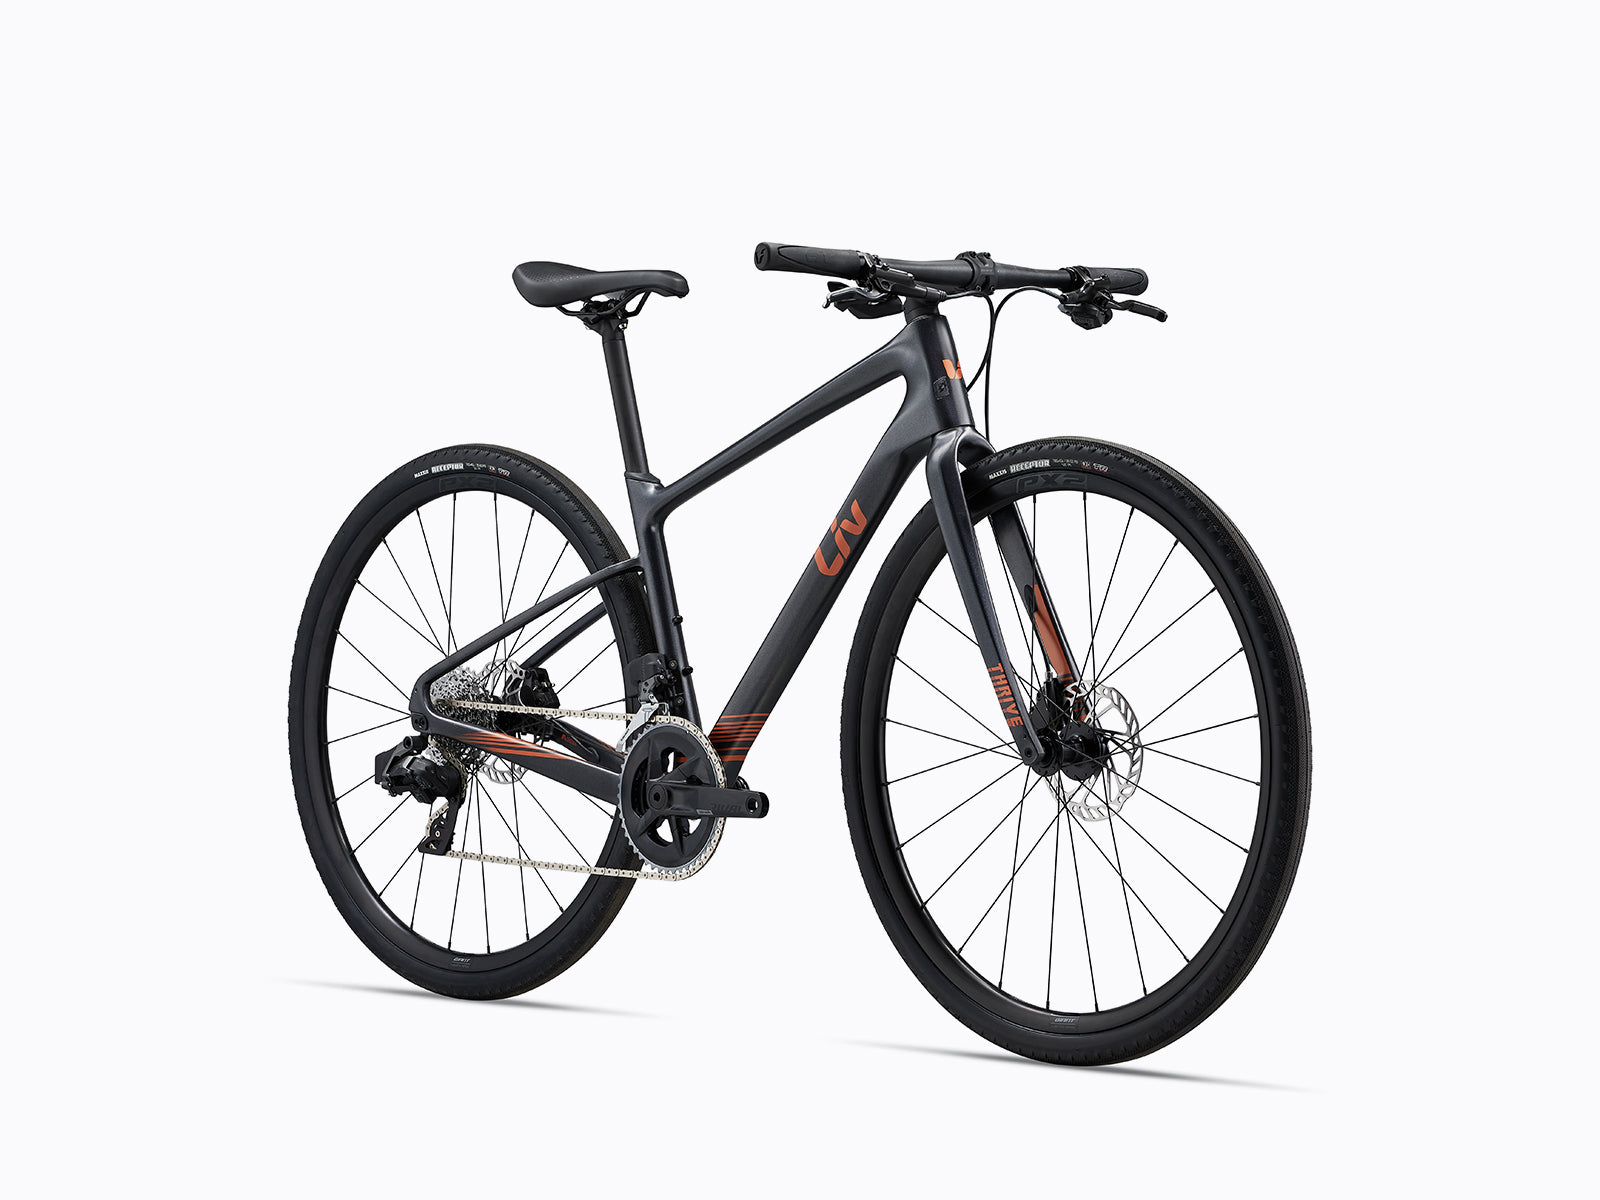 Image features the Liv thrive advanced 0 in black colour. Sold by Giant Melbourne, a bike shop in melbourne, australia